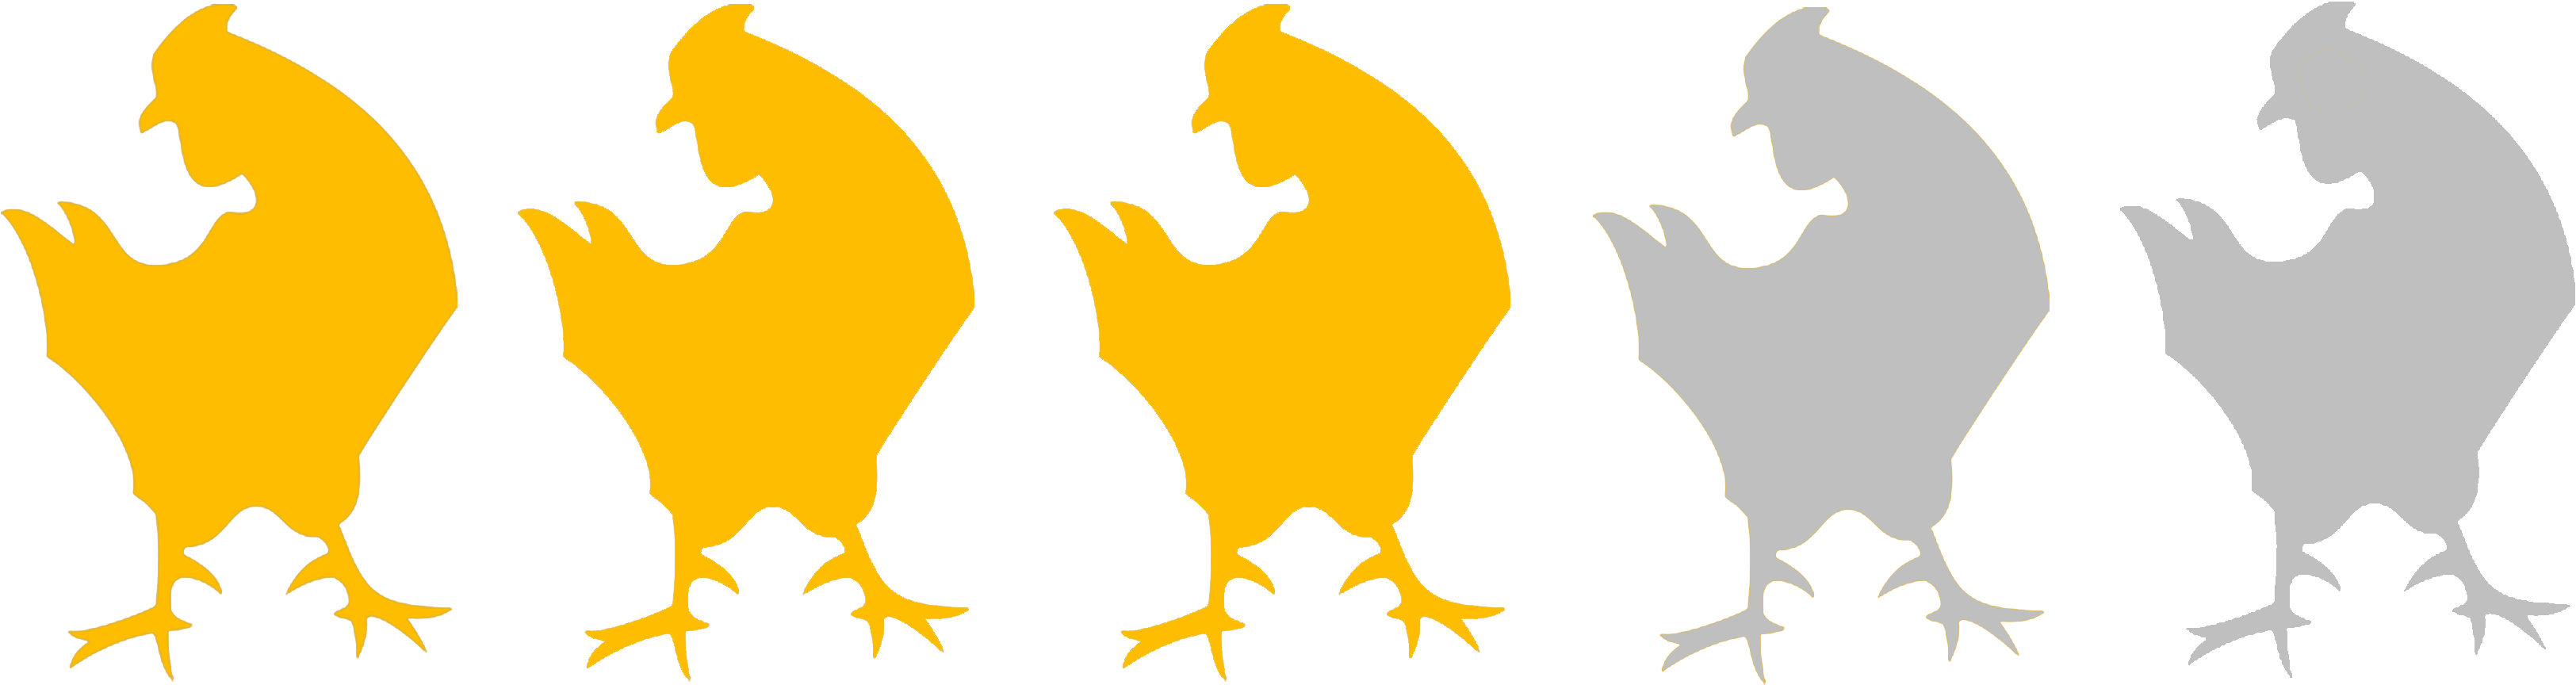 Chicken Rating - 3 Out Of 5 Rating (3300x900)